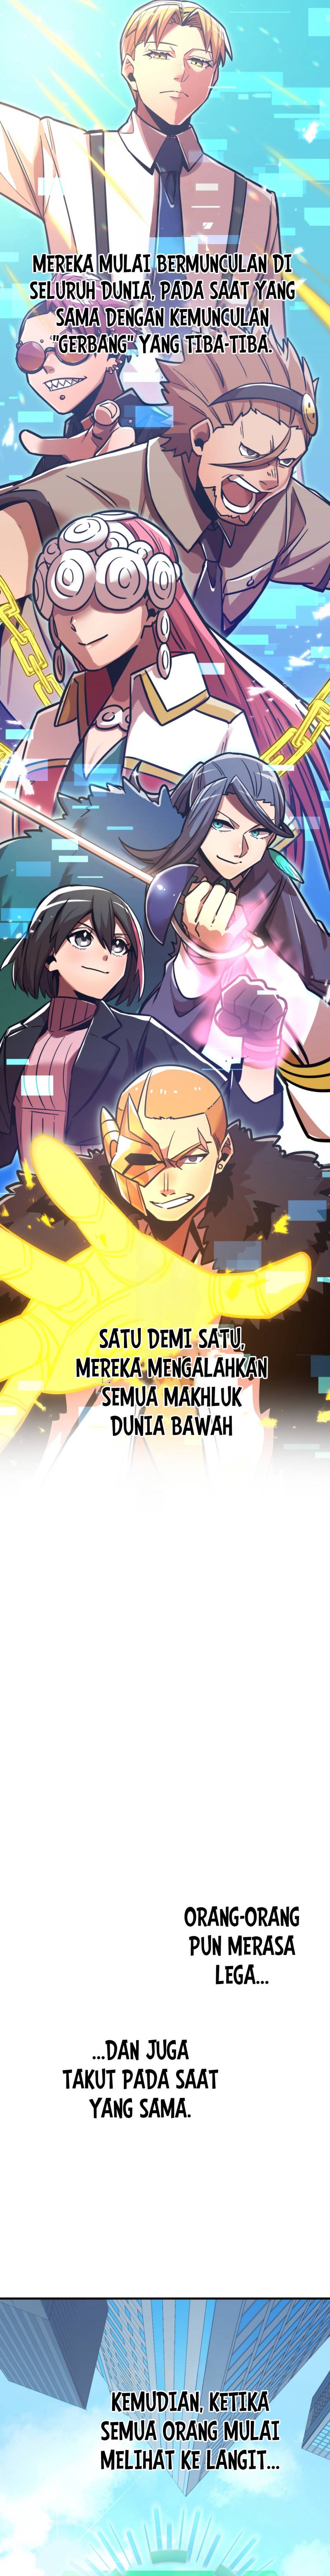 Savior of Divine Blood ~Draw Out 0.00000001% to Become the Strongest~ Chapter .1 Prolog Gambar 6